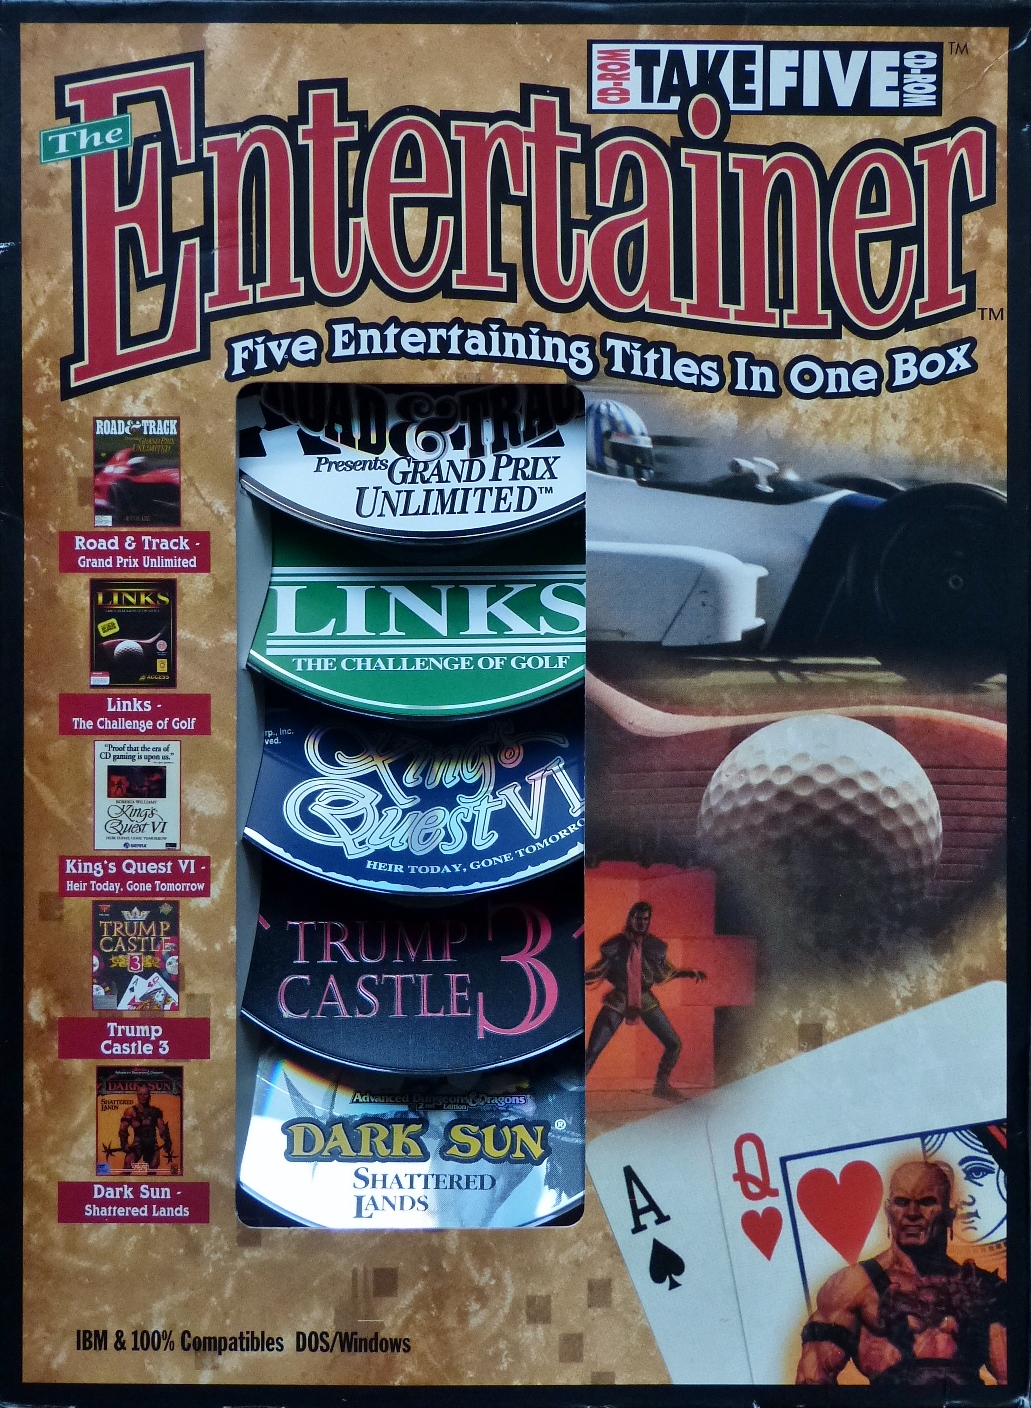 Entertainer, The: Take Five (Road & Track Presents: Grand Prix Unlimited; Links: The Challenge of Golf; King's Quest VI: Heir Today, Gone Tomorrow; Trump Castle 3; Dark Sun: Shattered Lands)